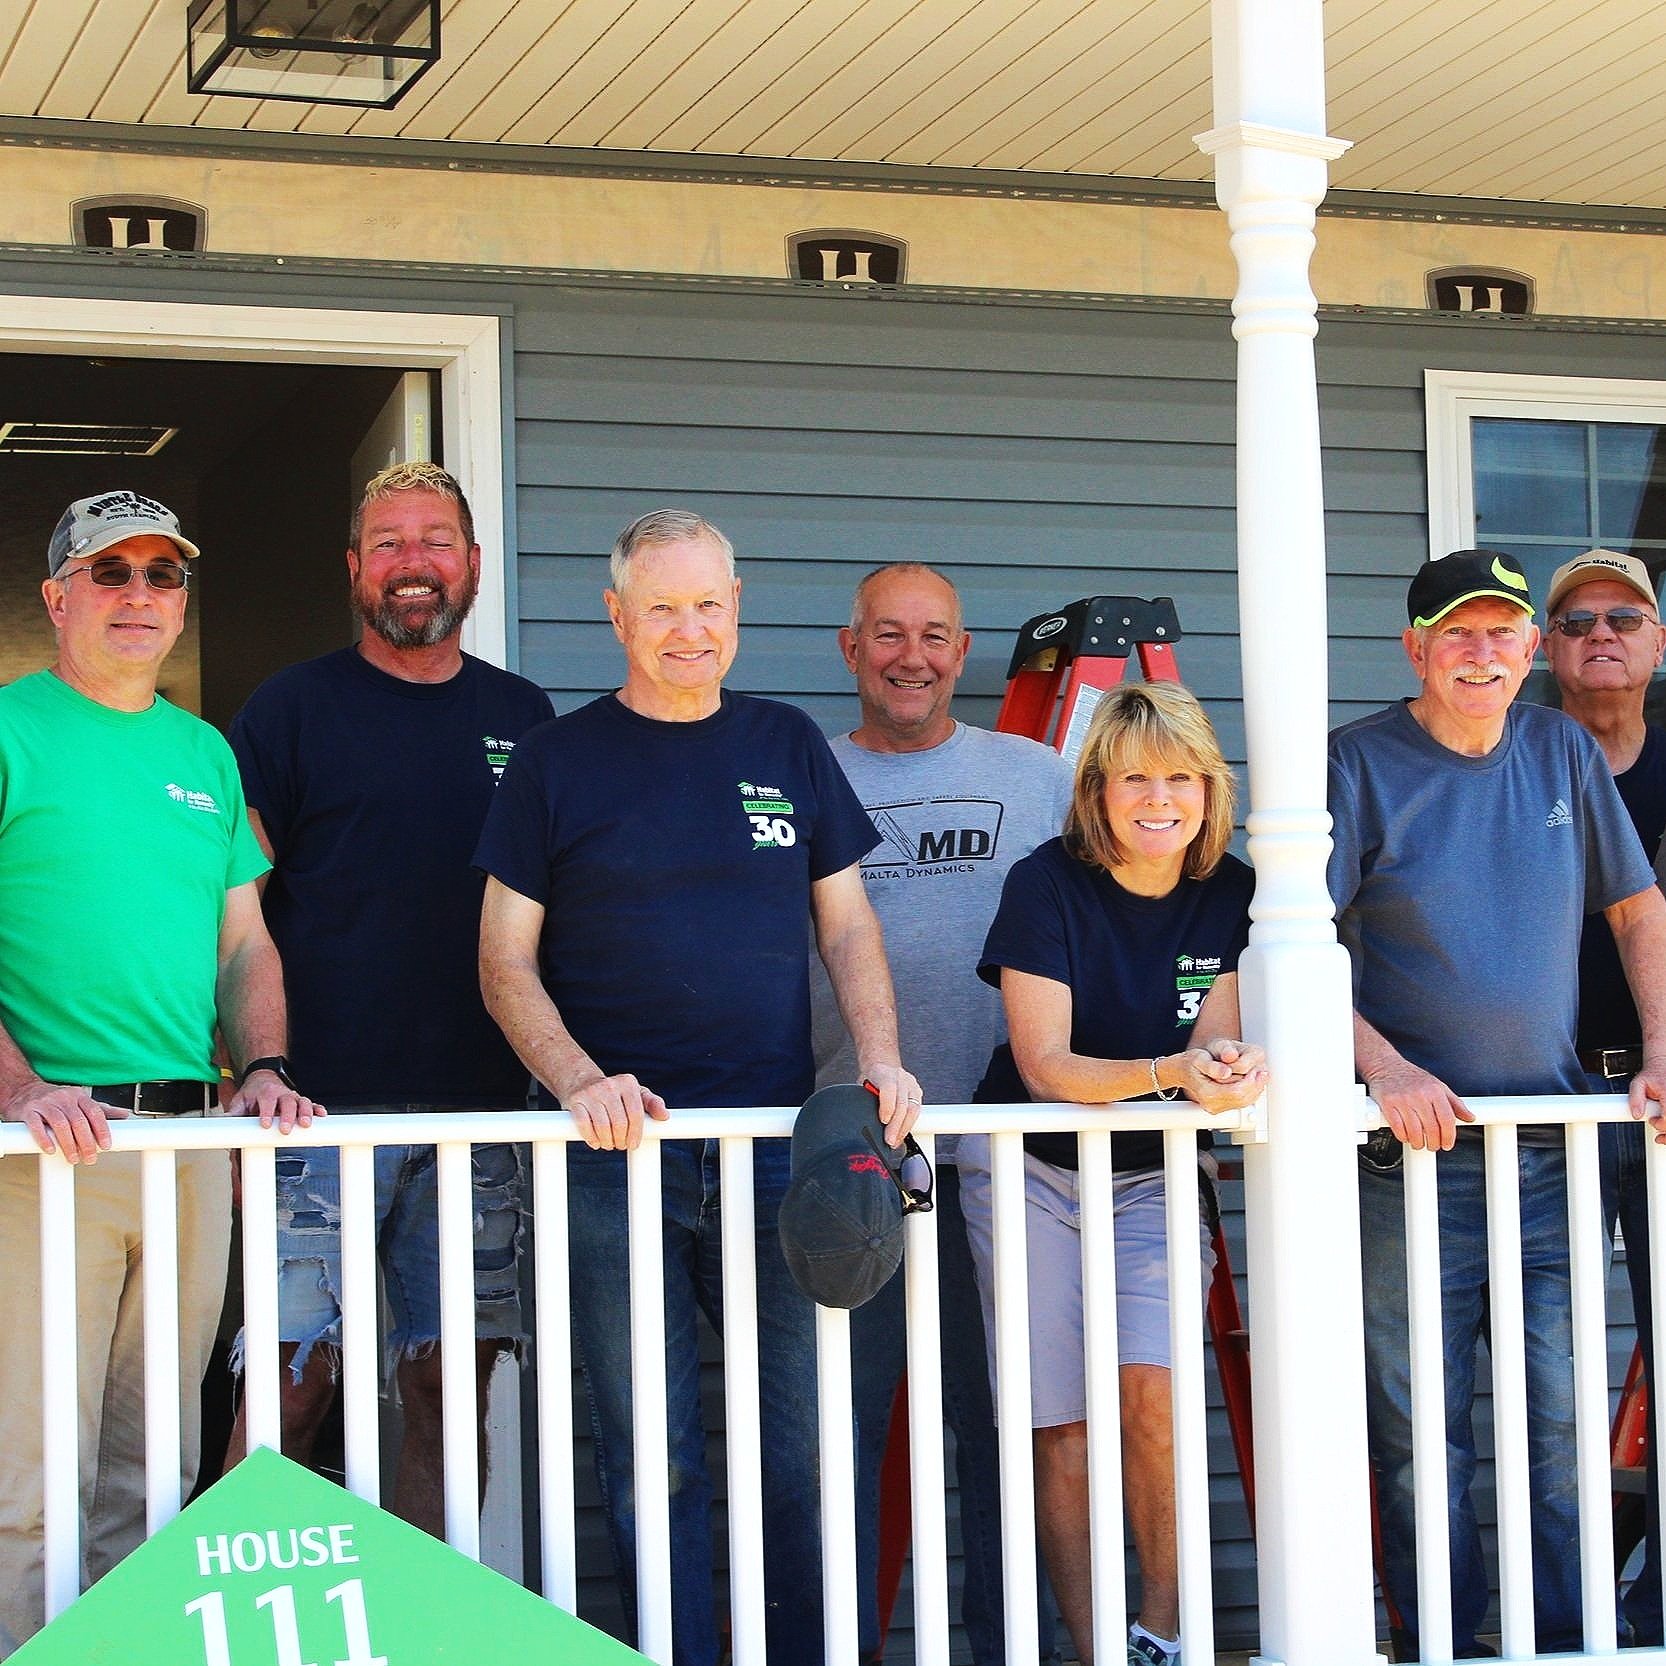 Group photo of volunteers on a porch